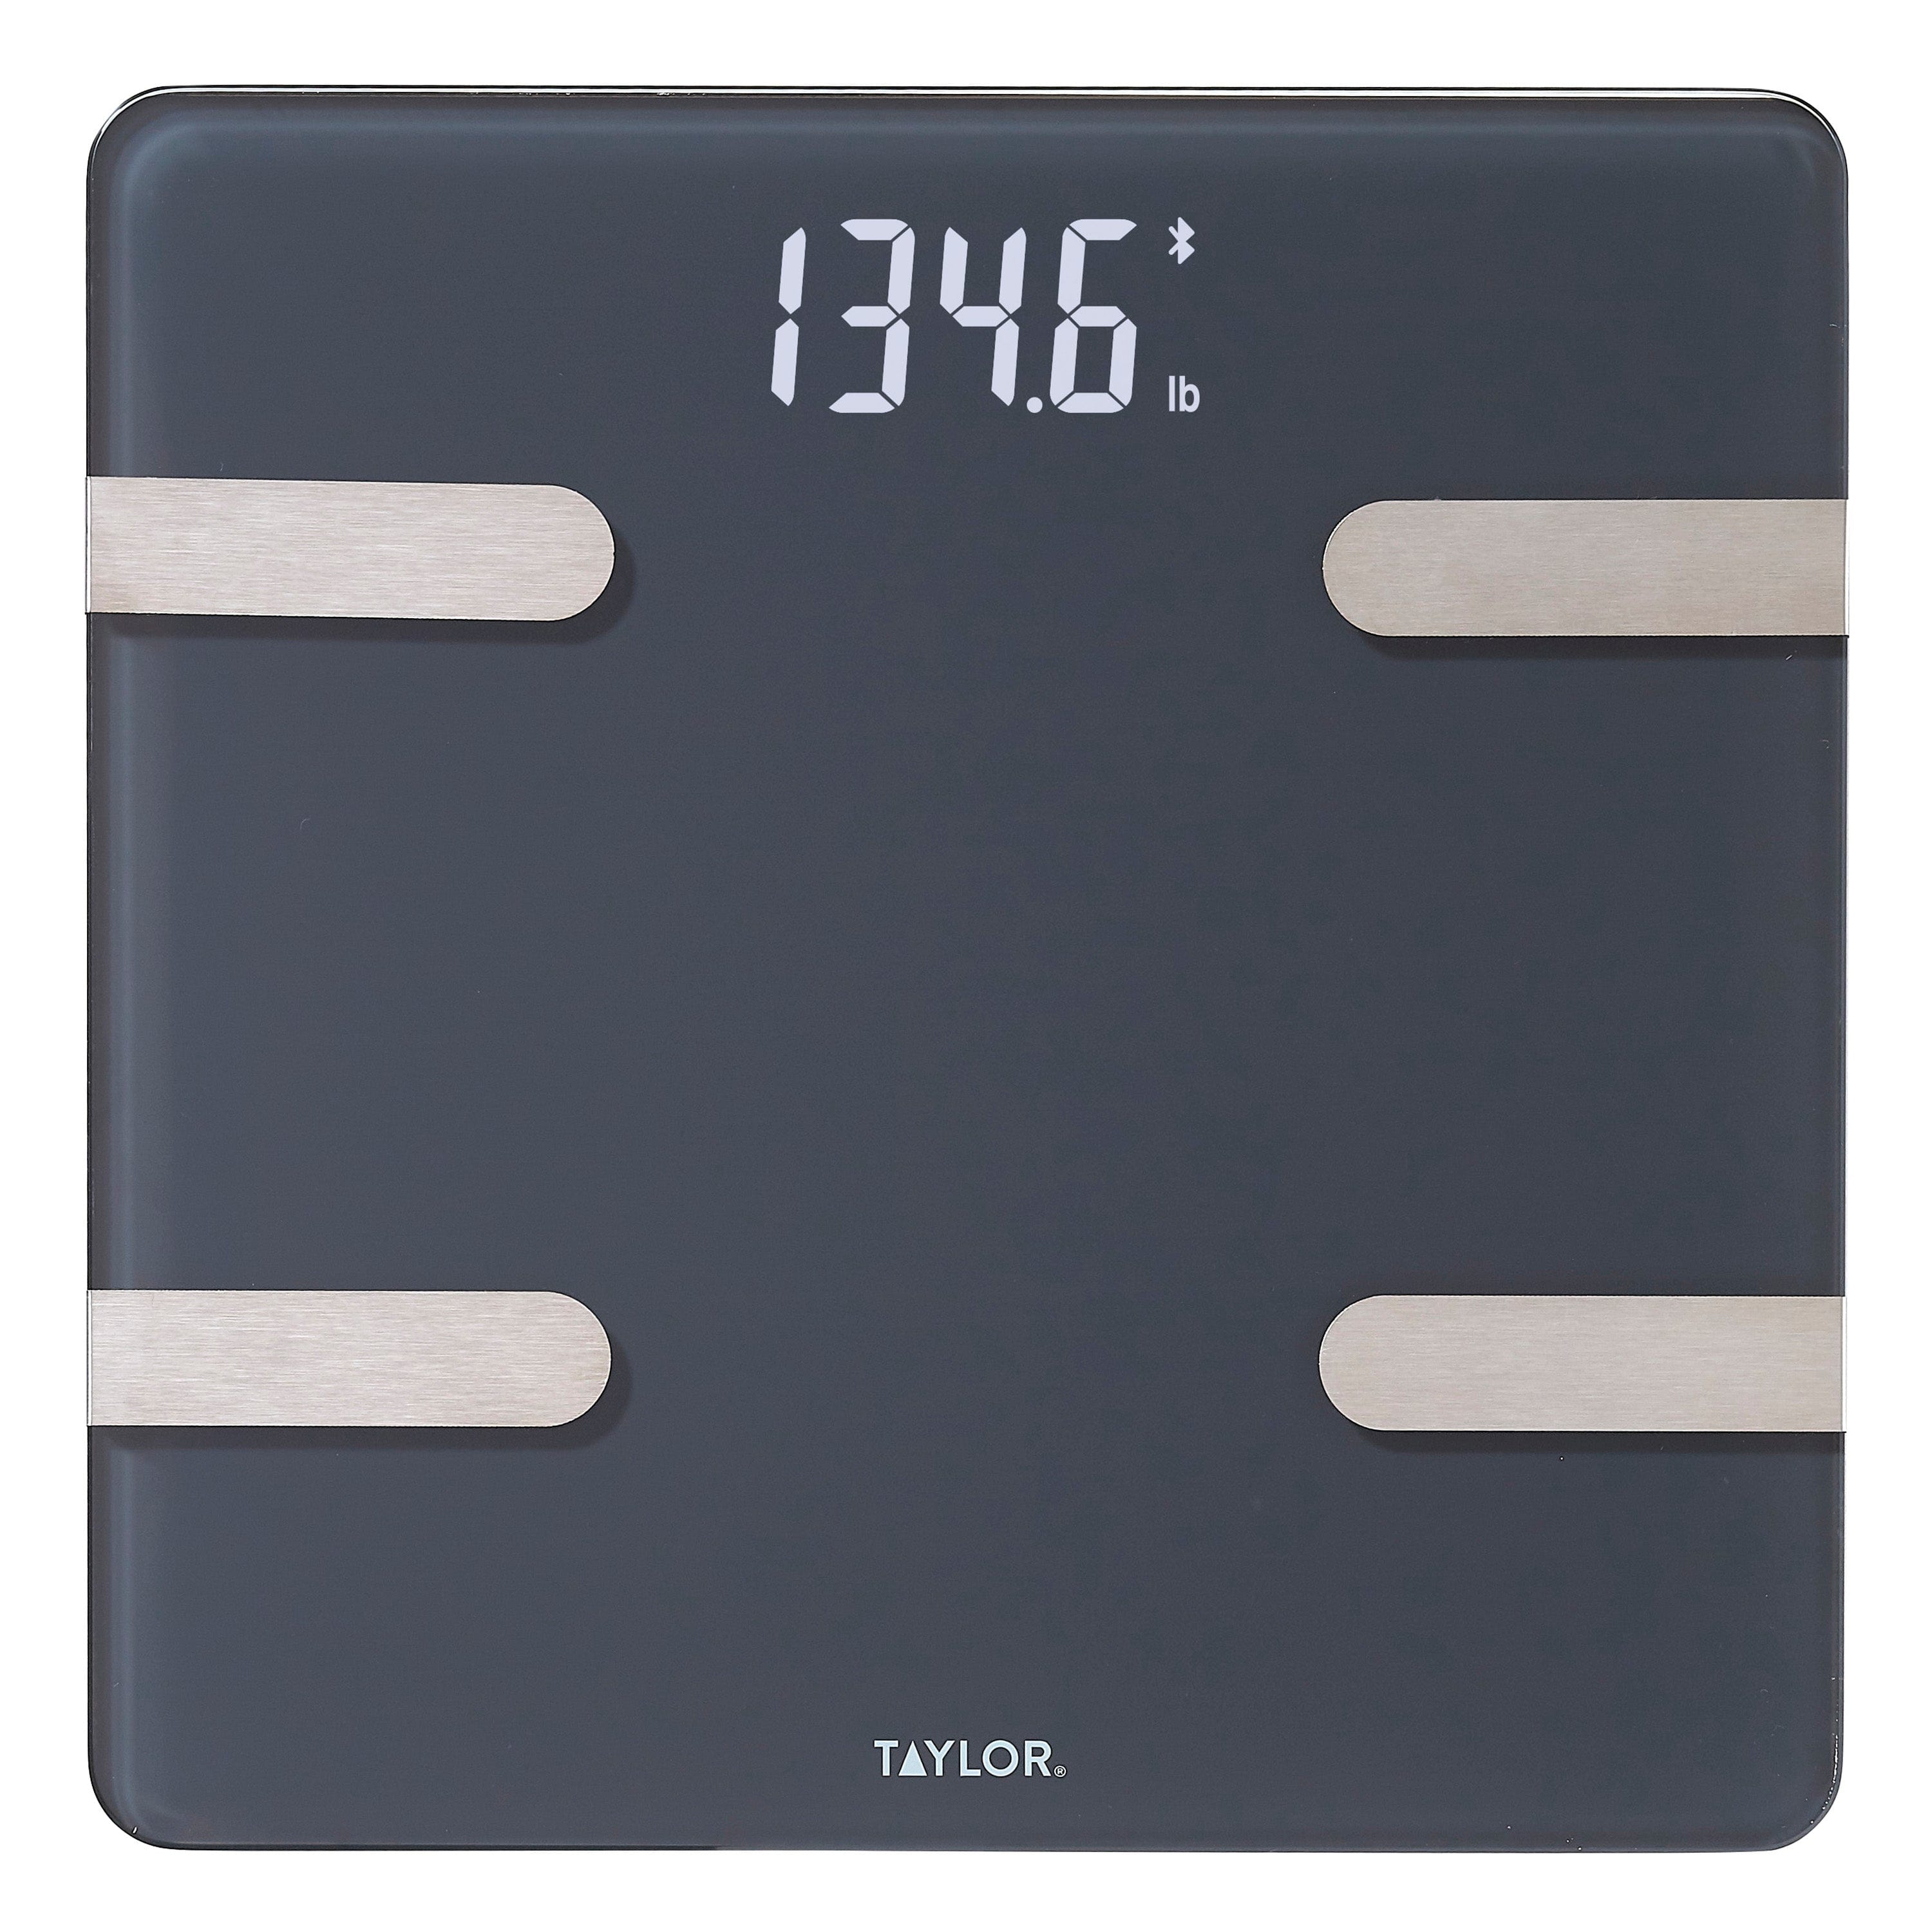 Smart BMI Digital Scale - Measure Weight and Body Fat - Most Accurate  Bluetooth Glass Bathroom Scale,Black